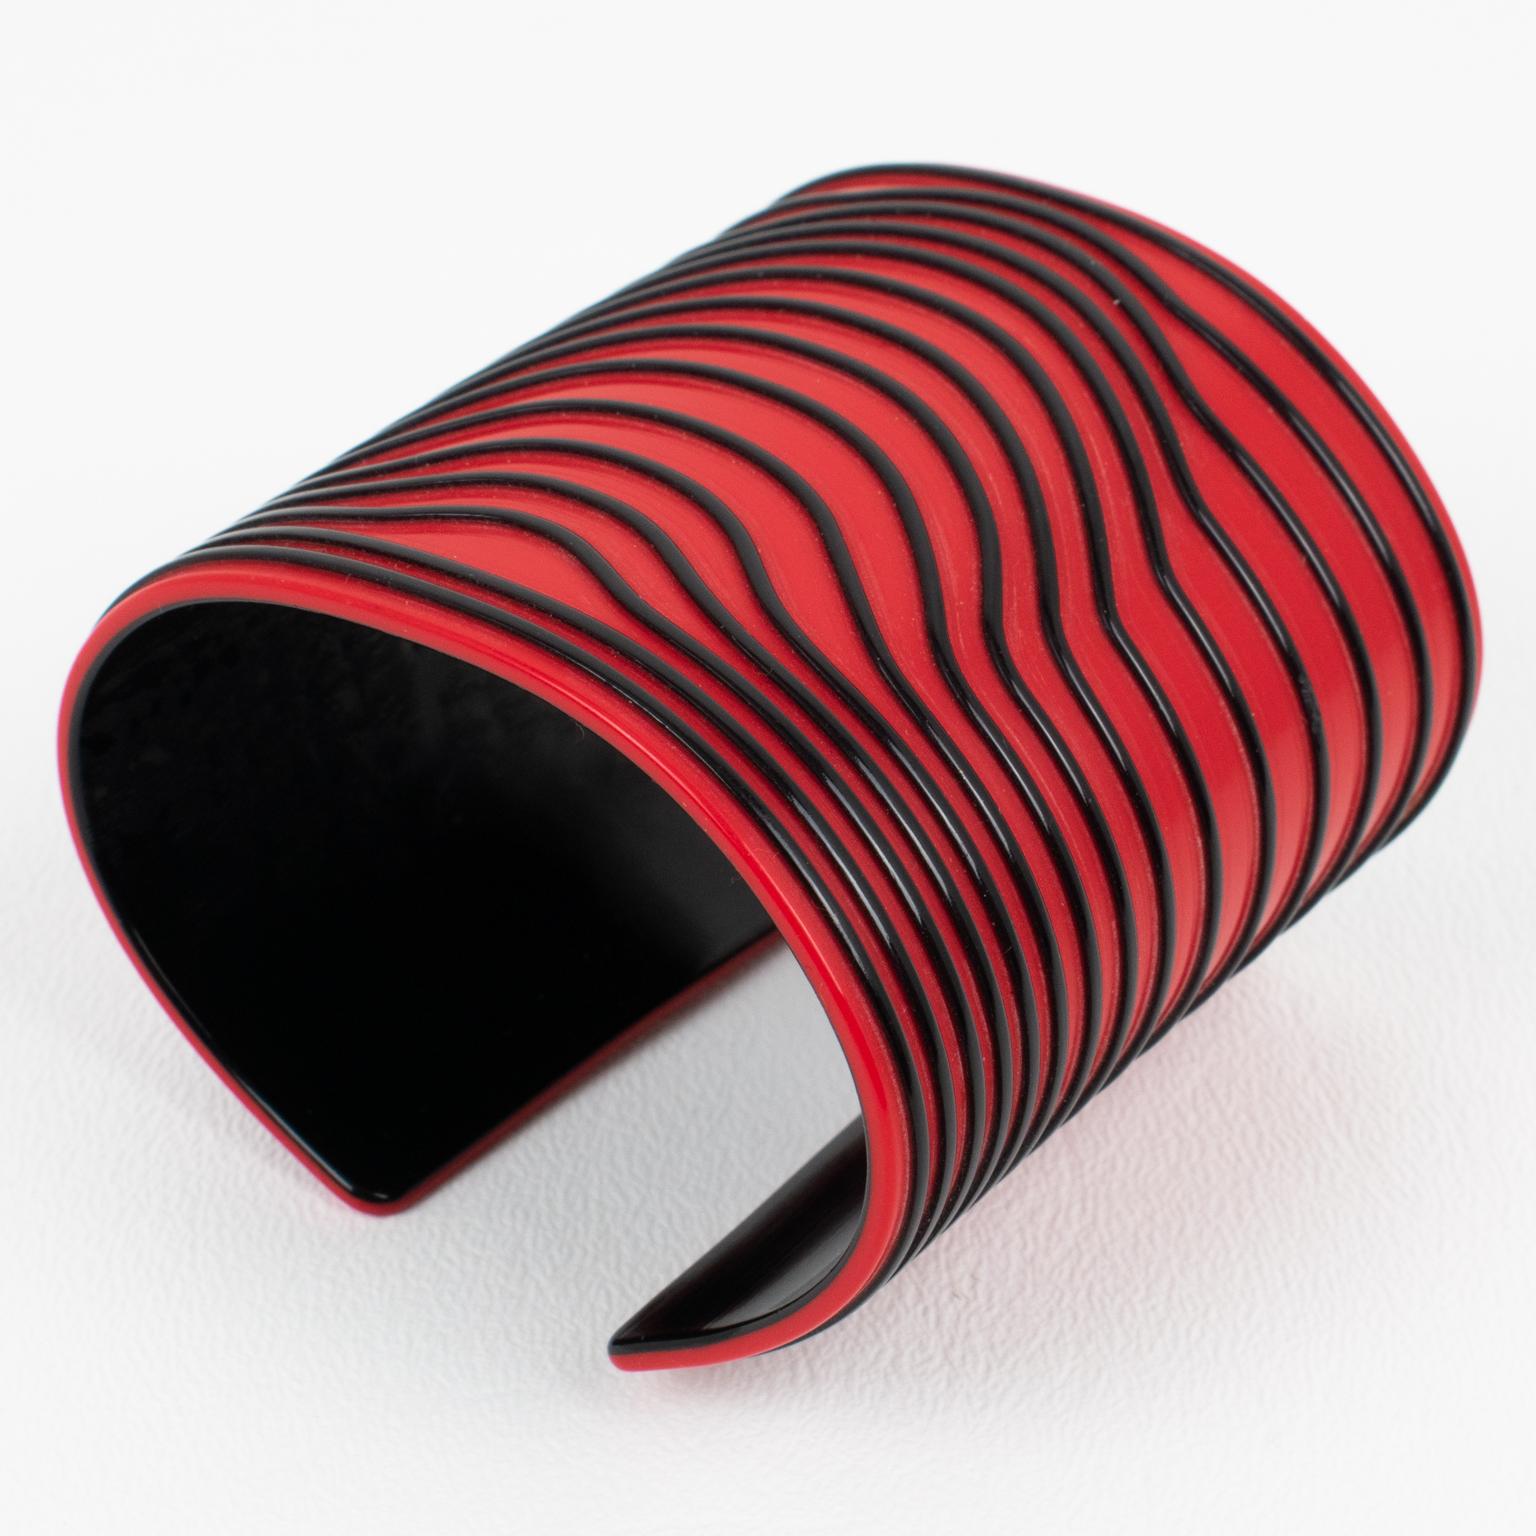 This stunning Jean Paul Gaultier Paris resin cuff bracelet features a kinetic striped design with carved black lines pattern over a bright red background. The design reminds me of the iconic nautical sweater that Gaultier became famous for. The